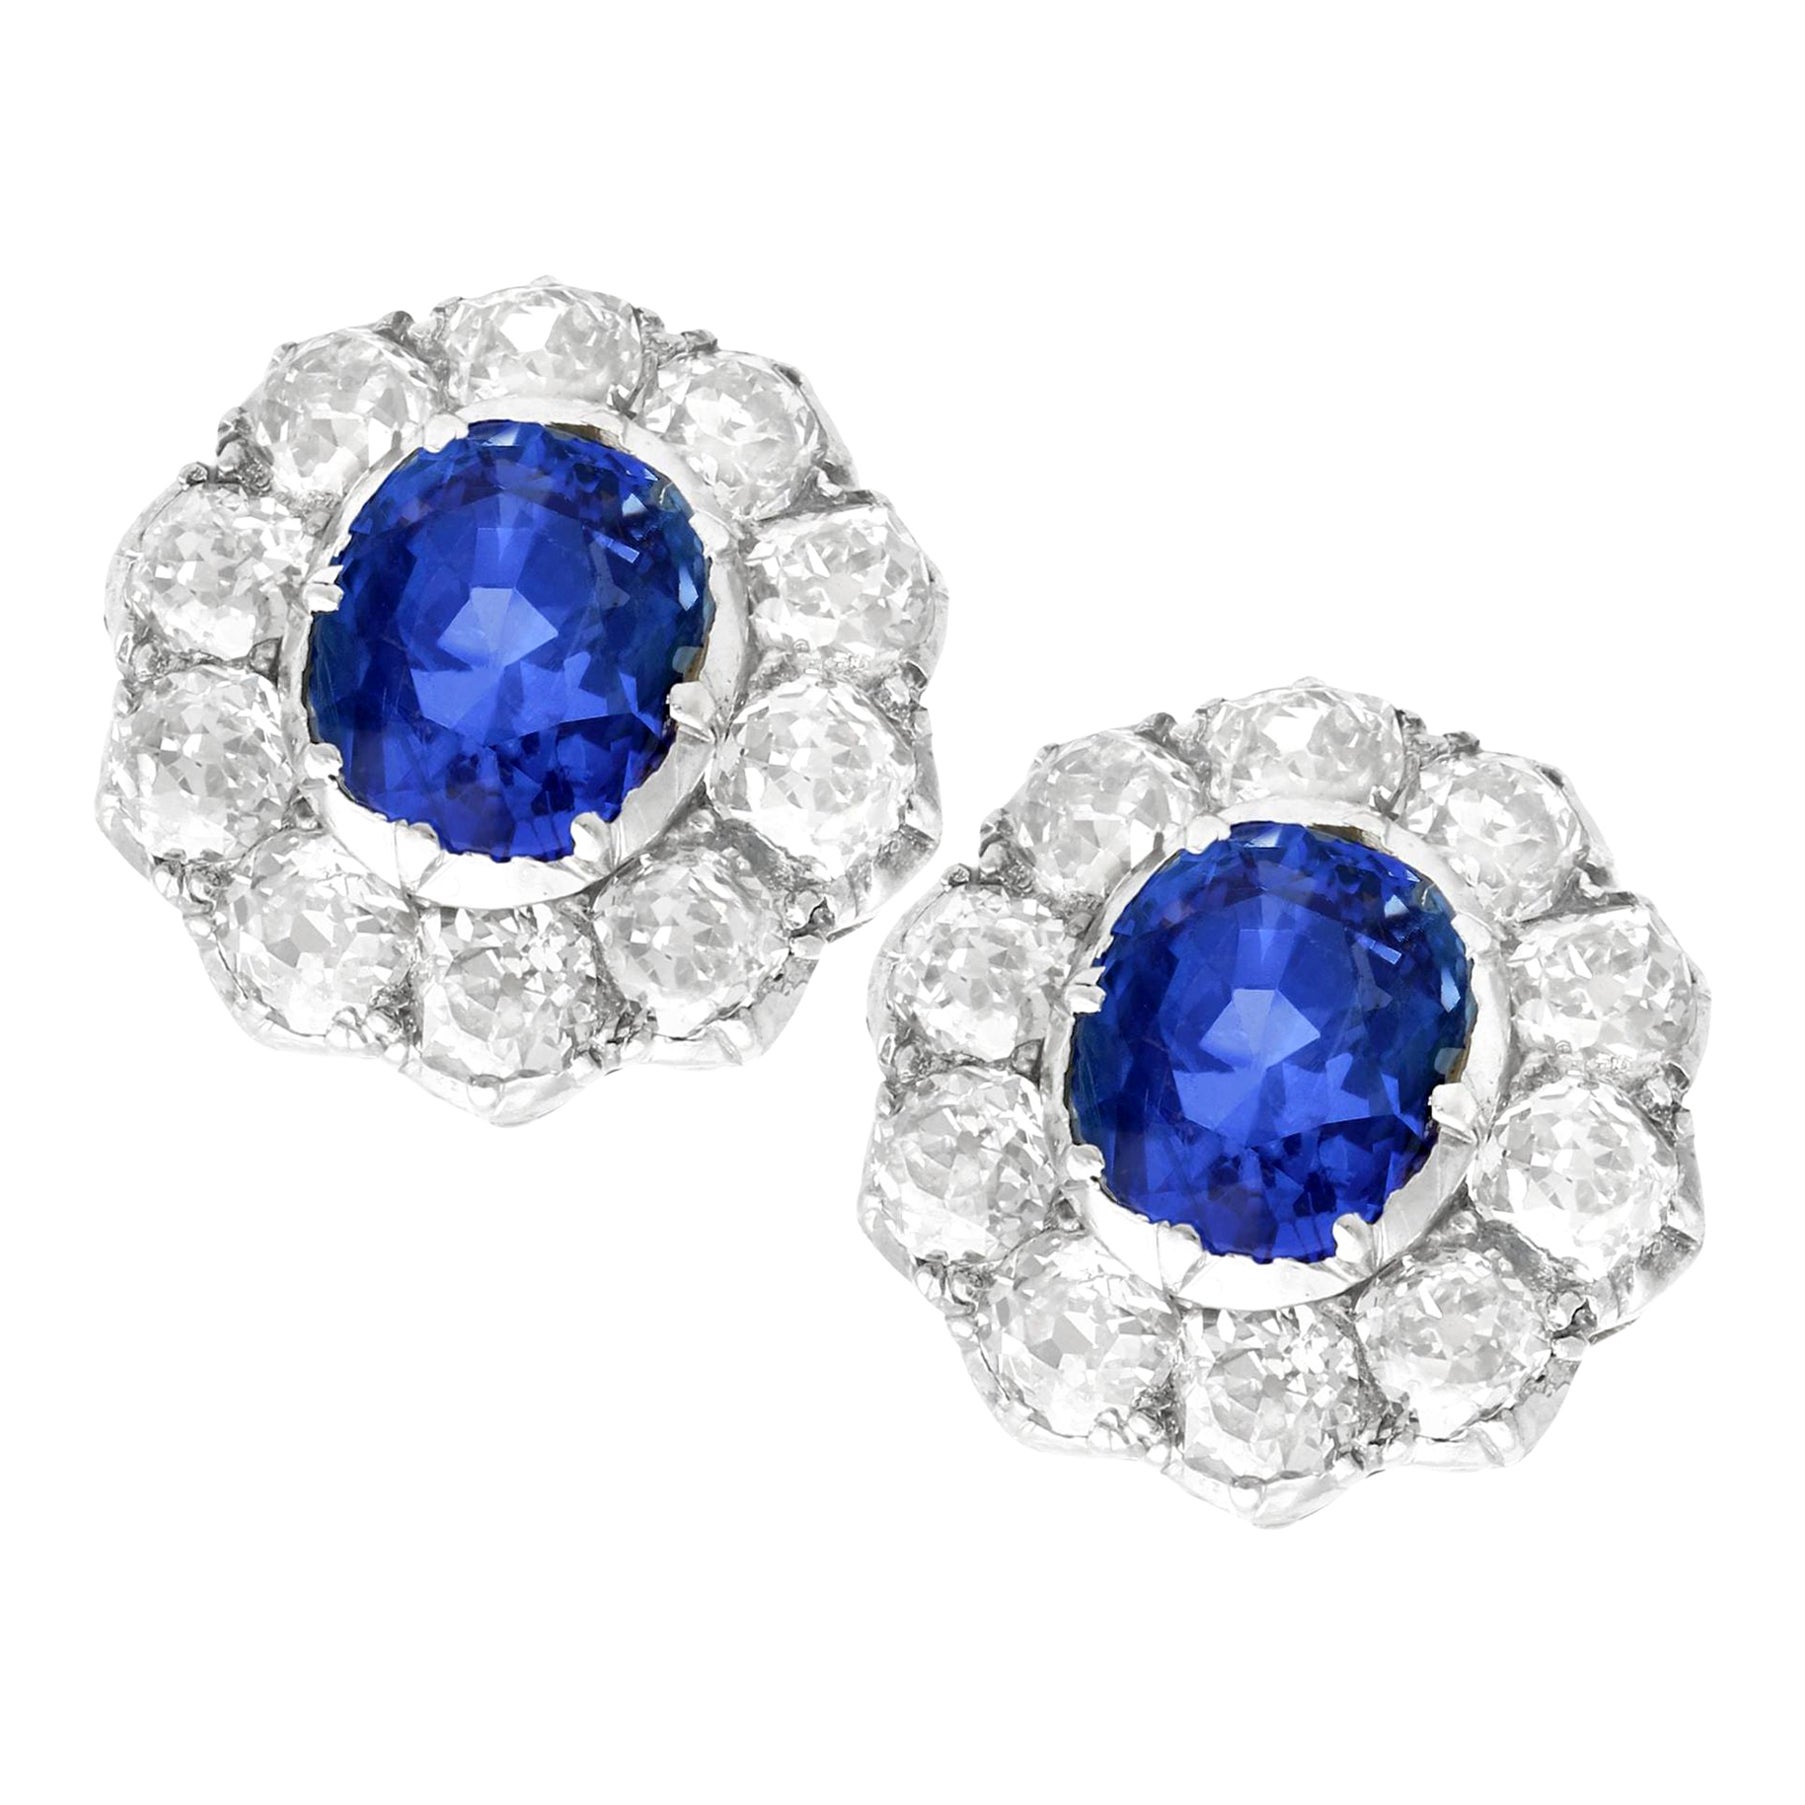 2.10Ct Basaltic Sapphire and 3.30Ct Diamond Yellow Gold Cluster Earrings For Sale